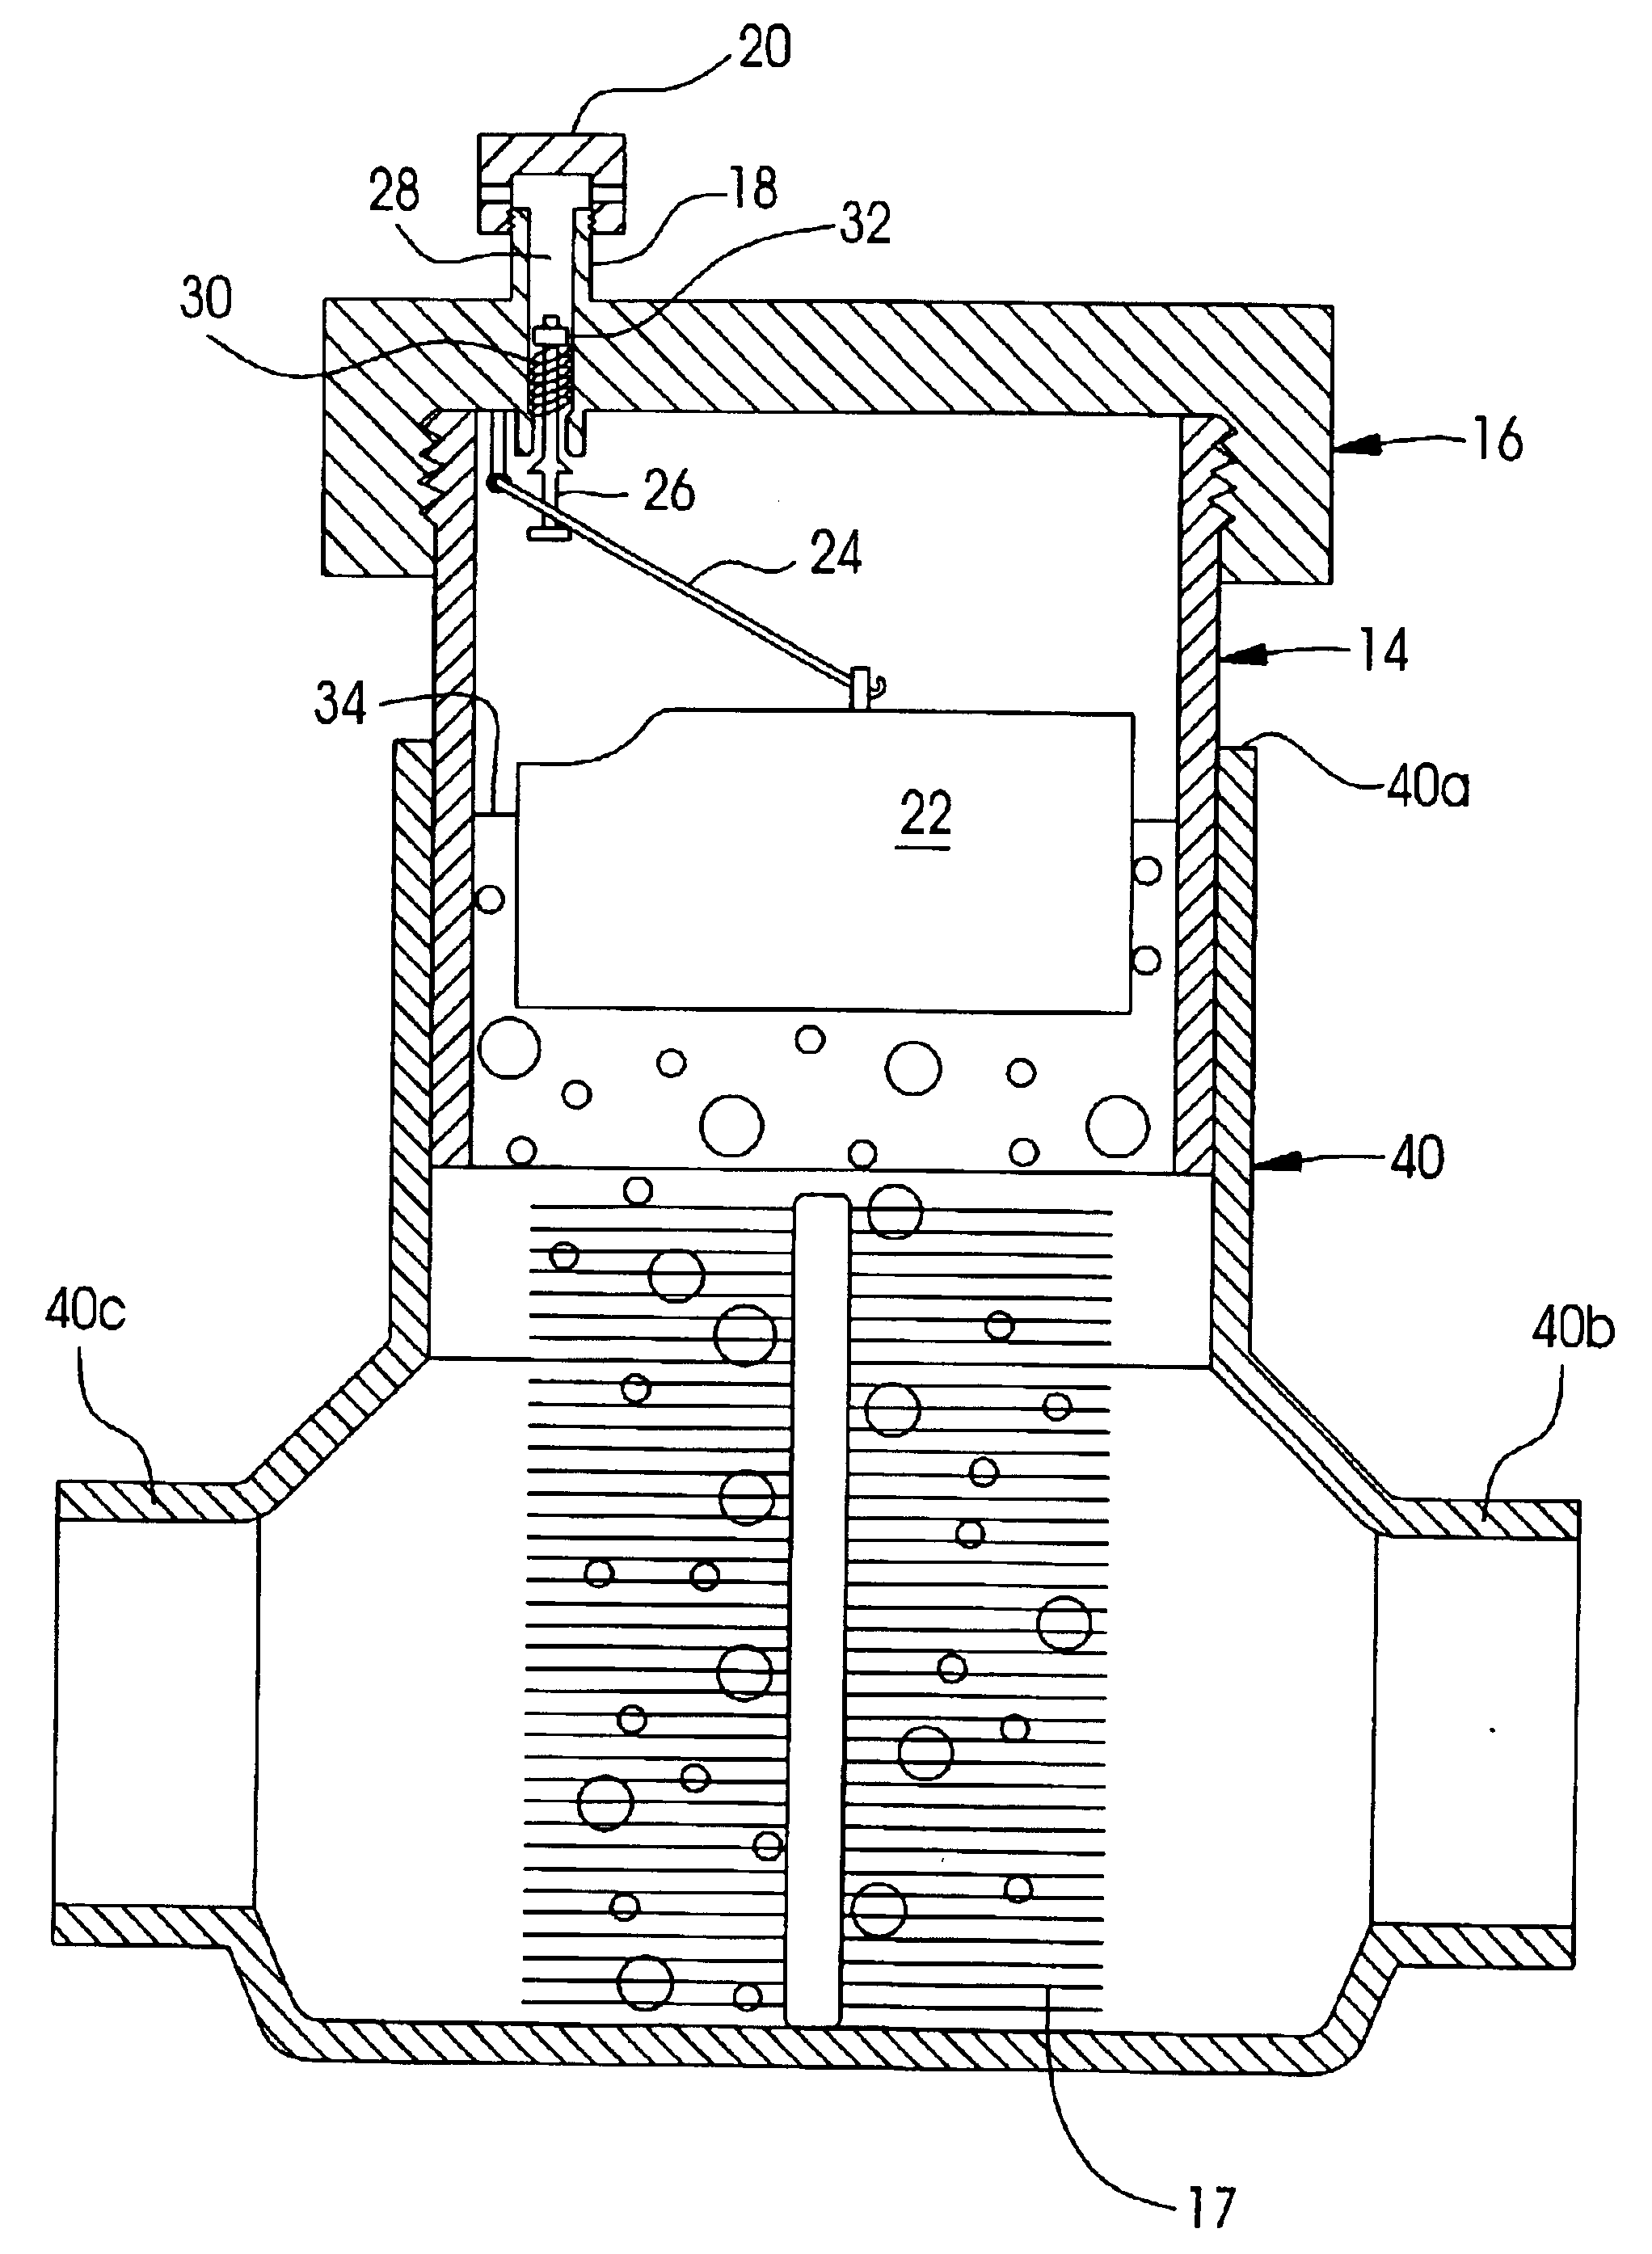 Method and kit for use with standard pipe couplings to construct a de-aerator